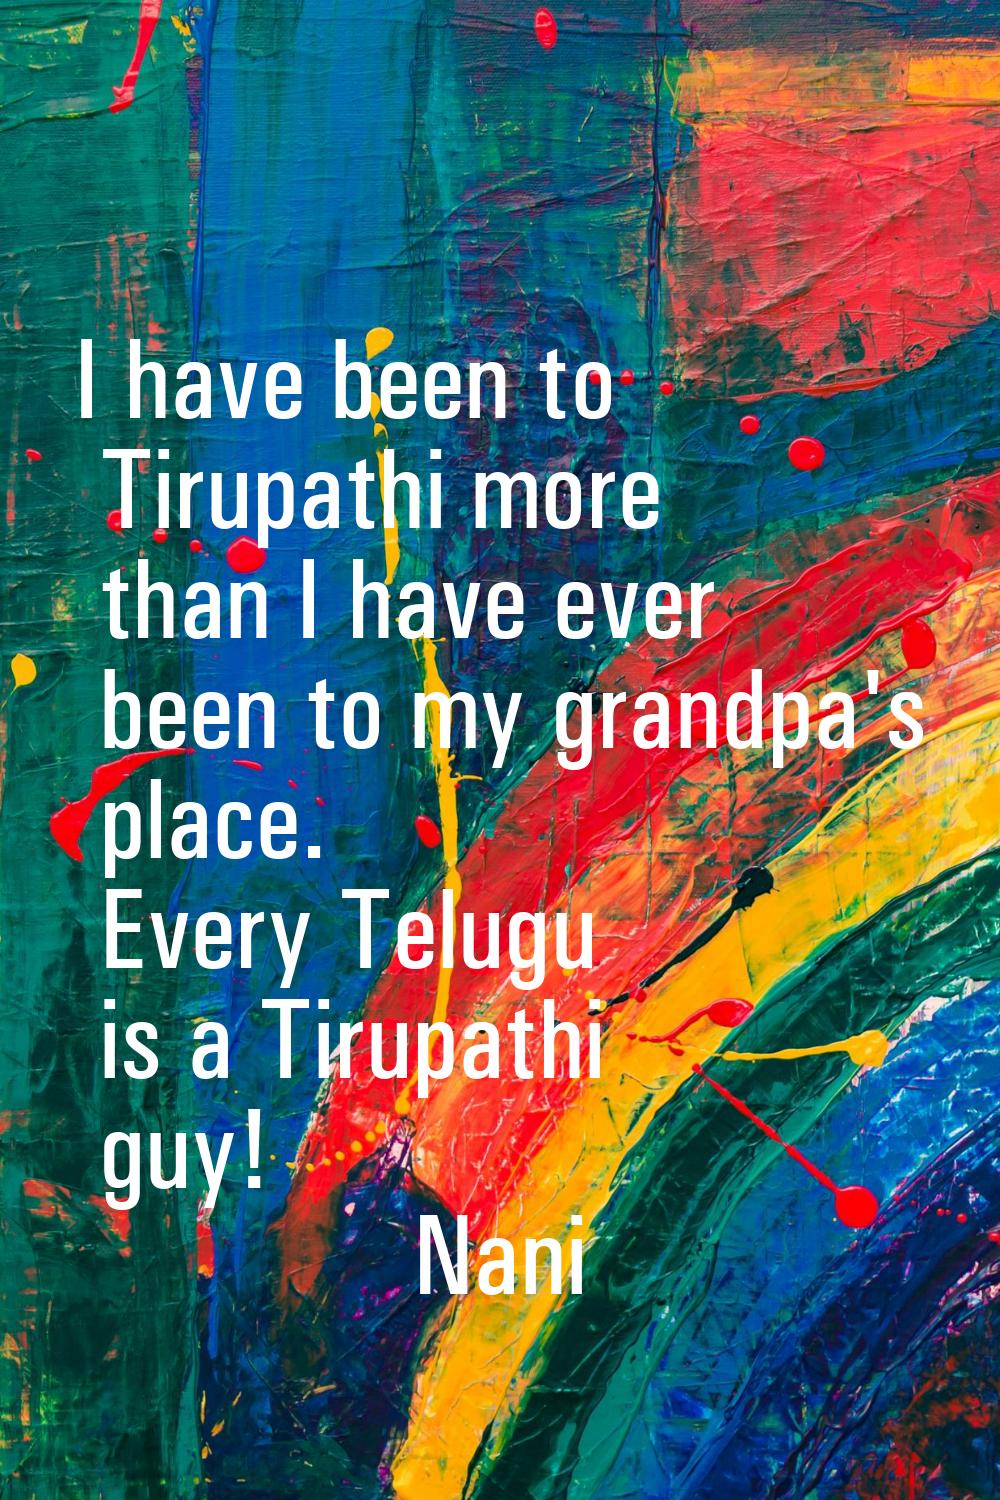 I have been to Tirupathi more than I have ever been to my grandpa's place. Every Telugu is a Tirupa